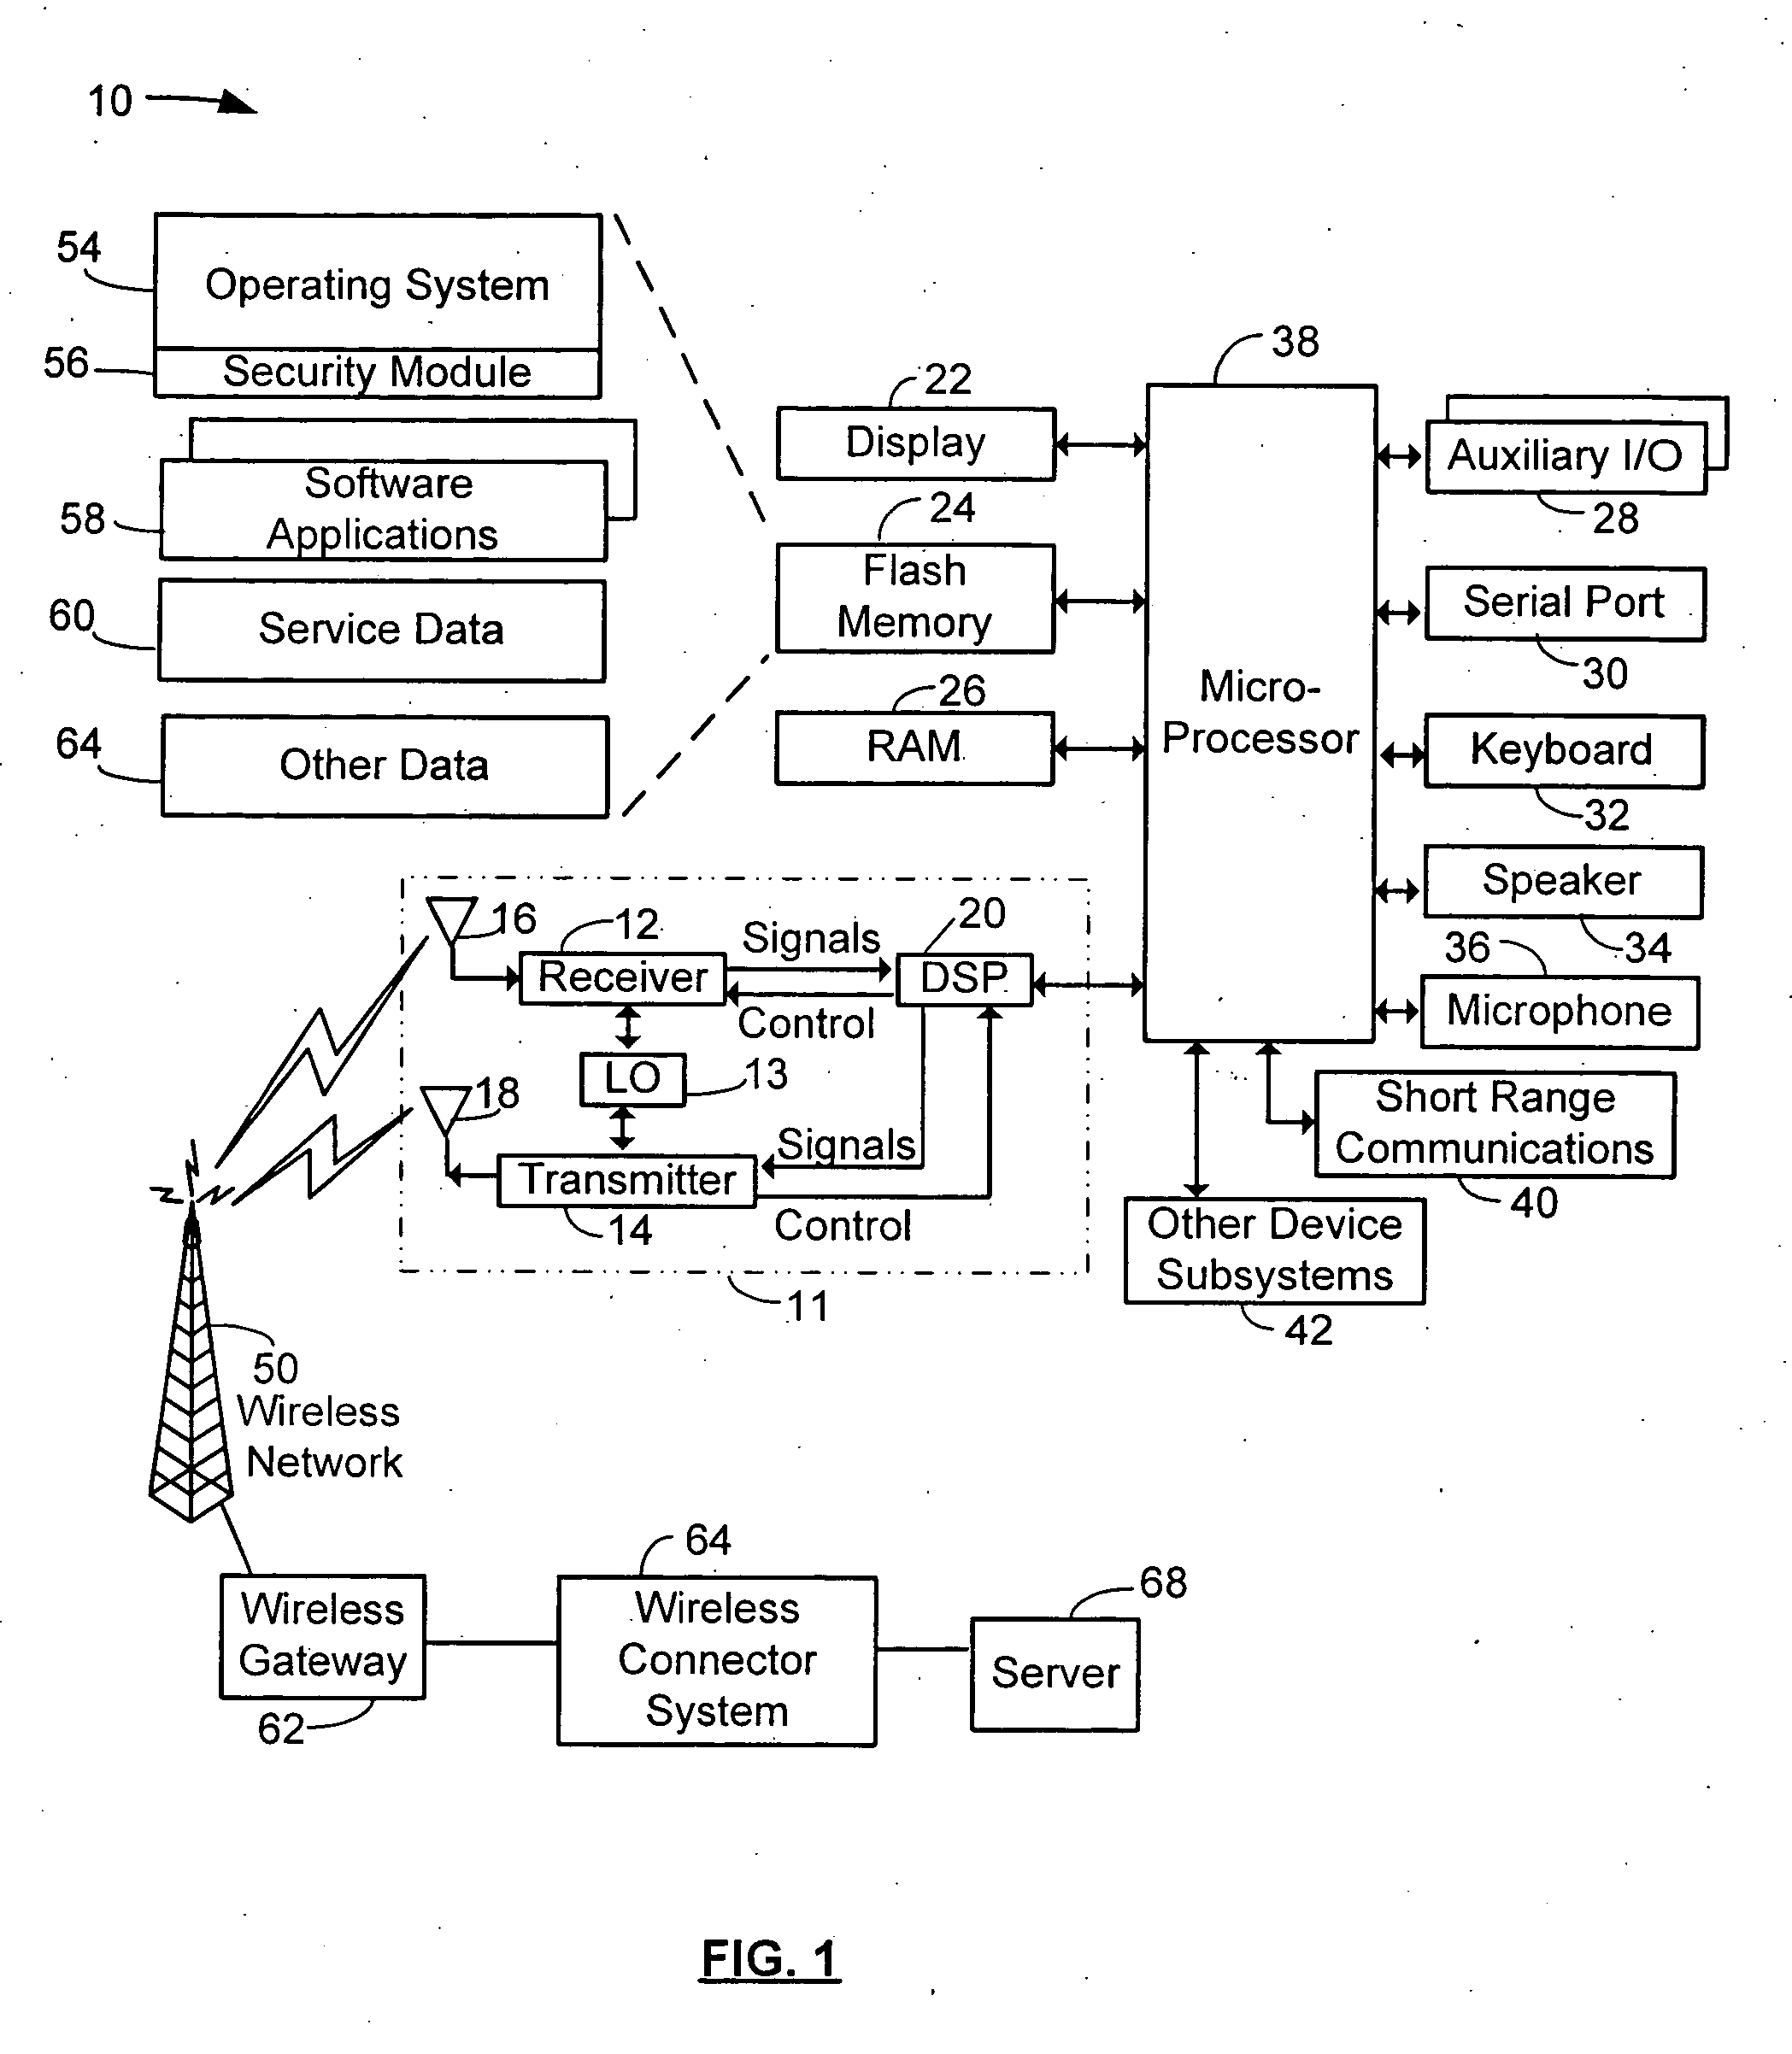 Security for mobile communications device